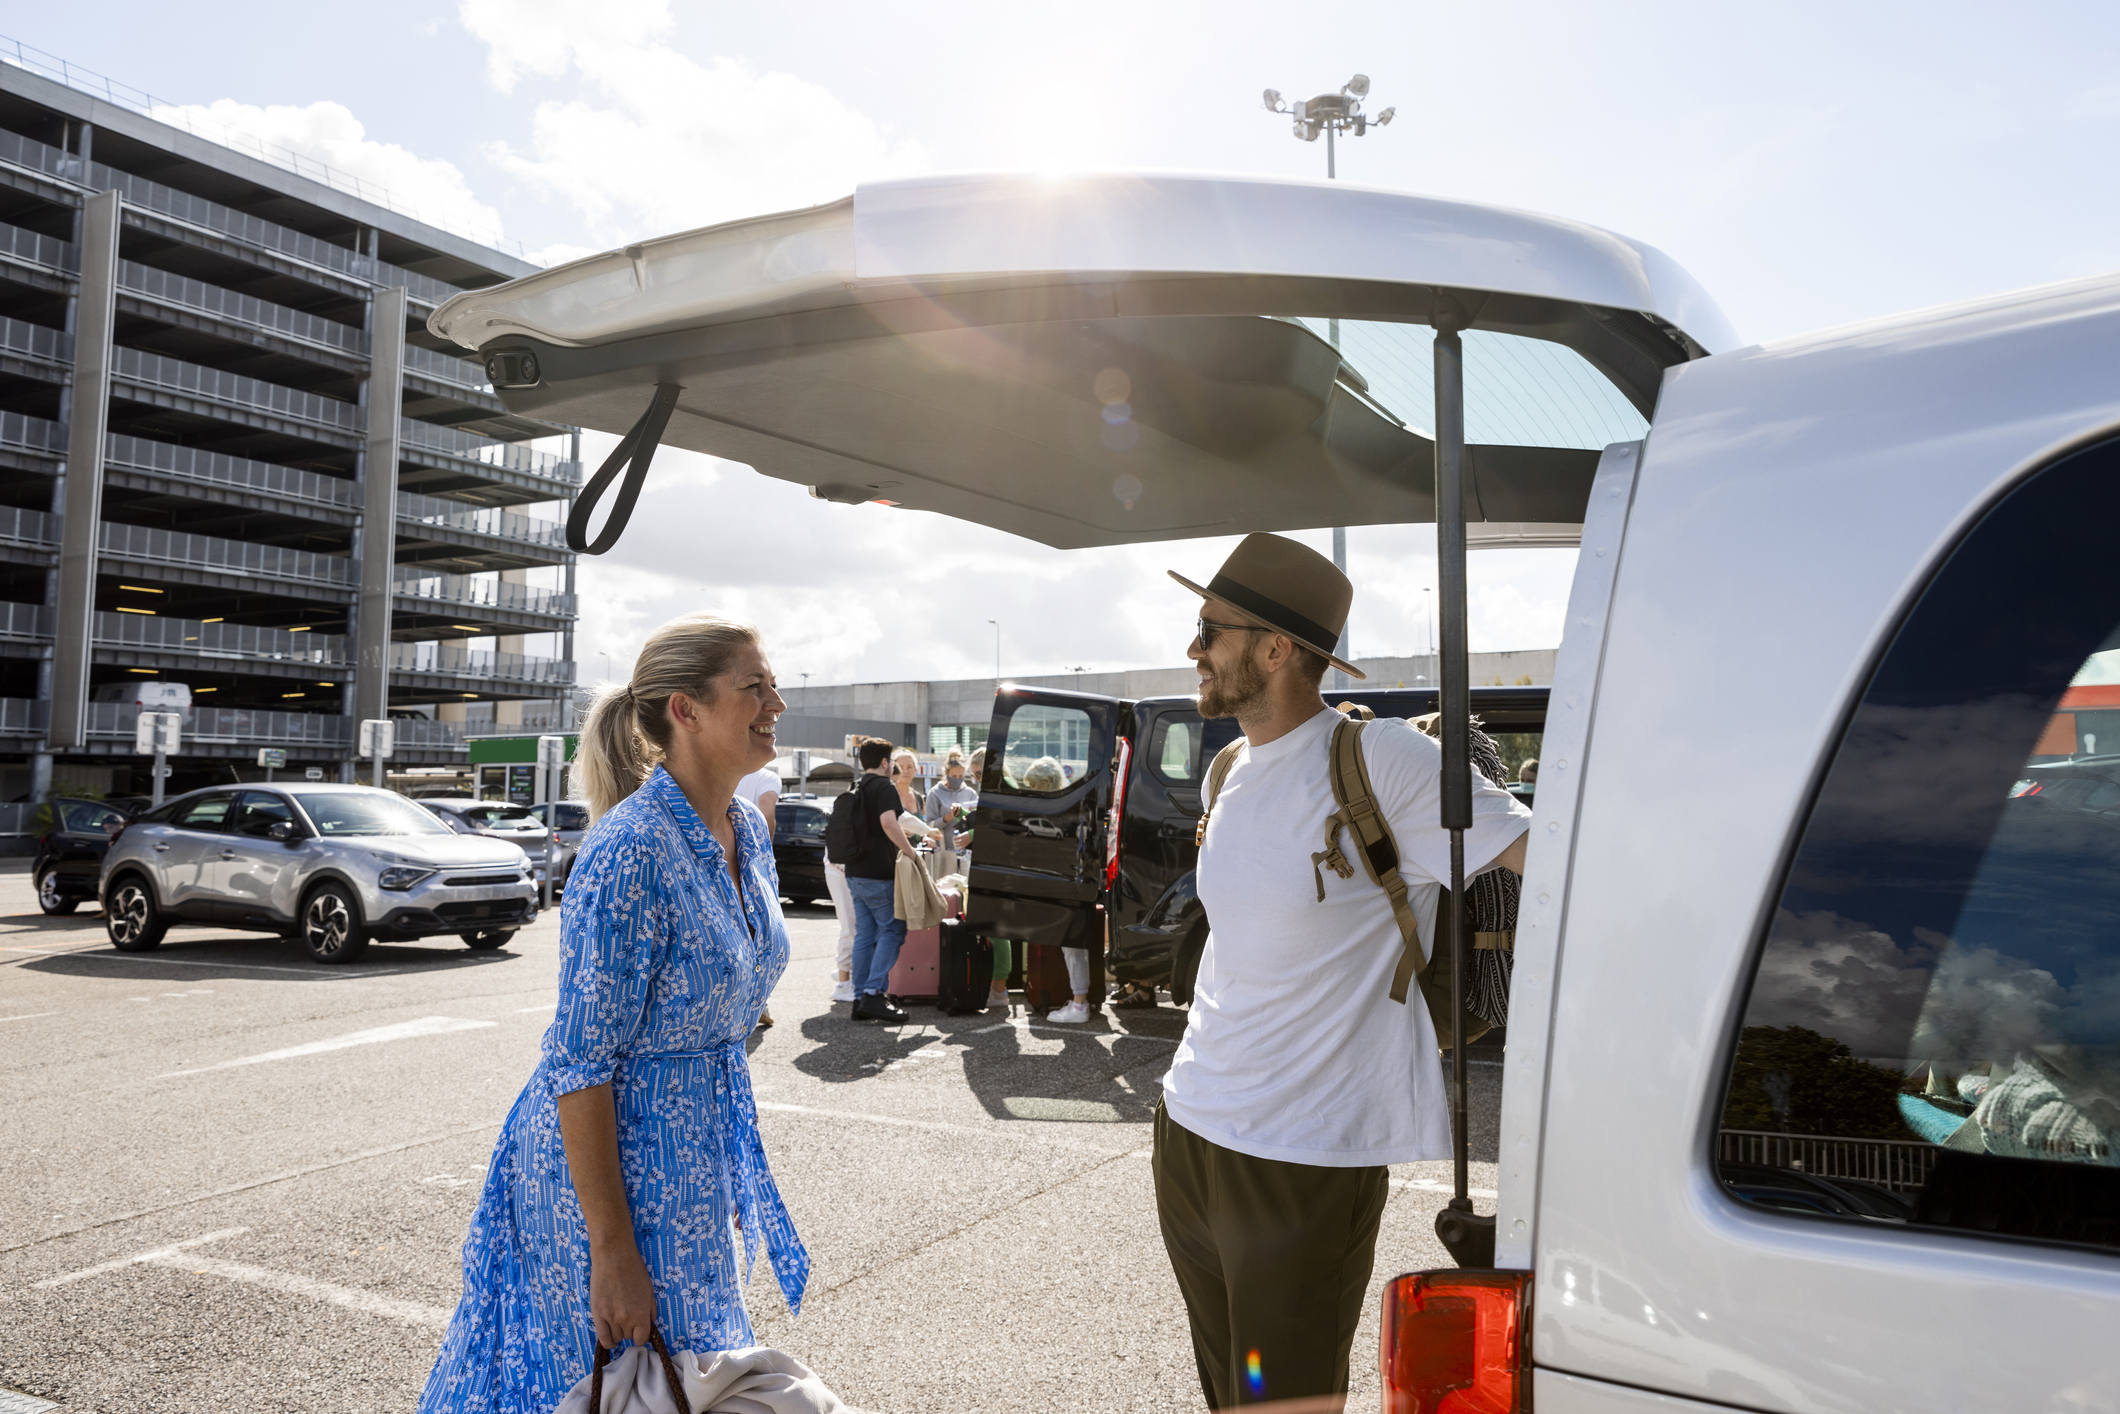 Mother and son packing up a rental van where they are vacationing to. They are standing in a car park at an airport in the sun.